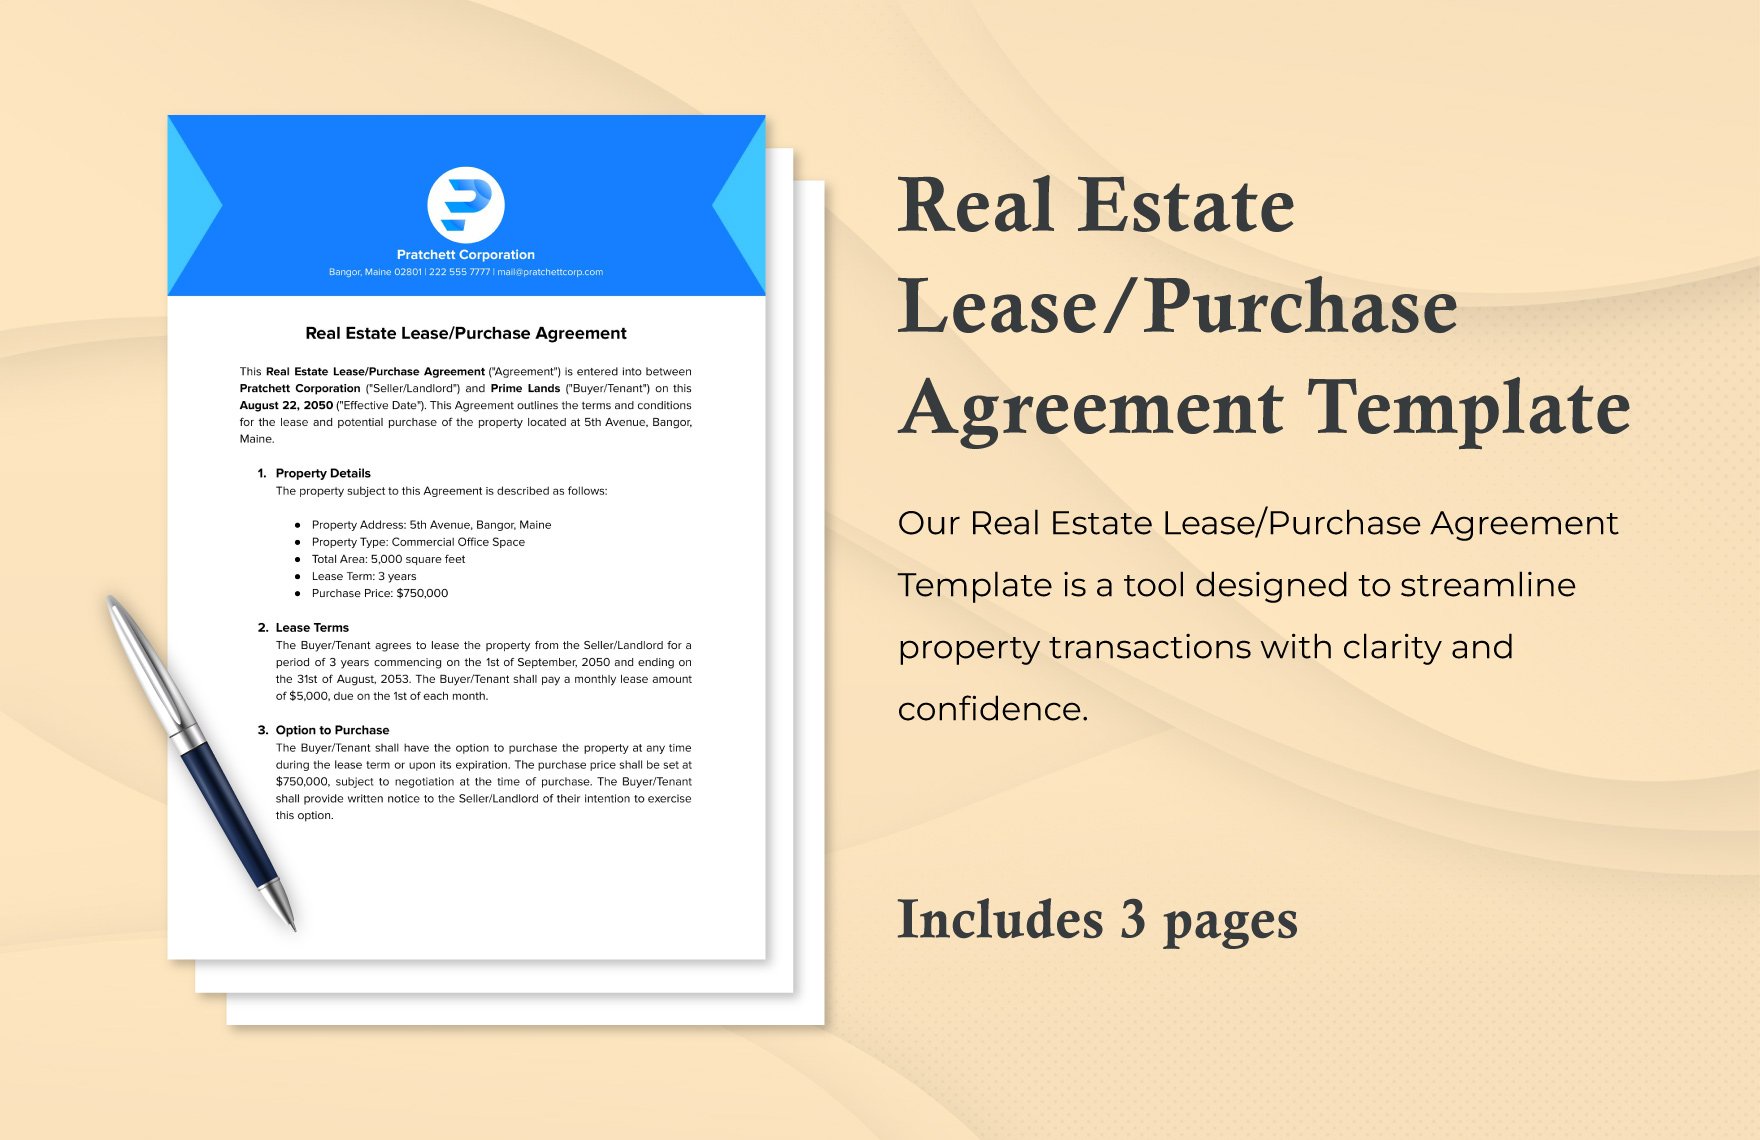 Real Estate Lease/Purchase Agreement Template